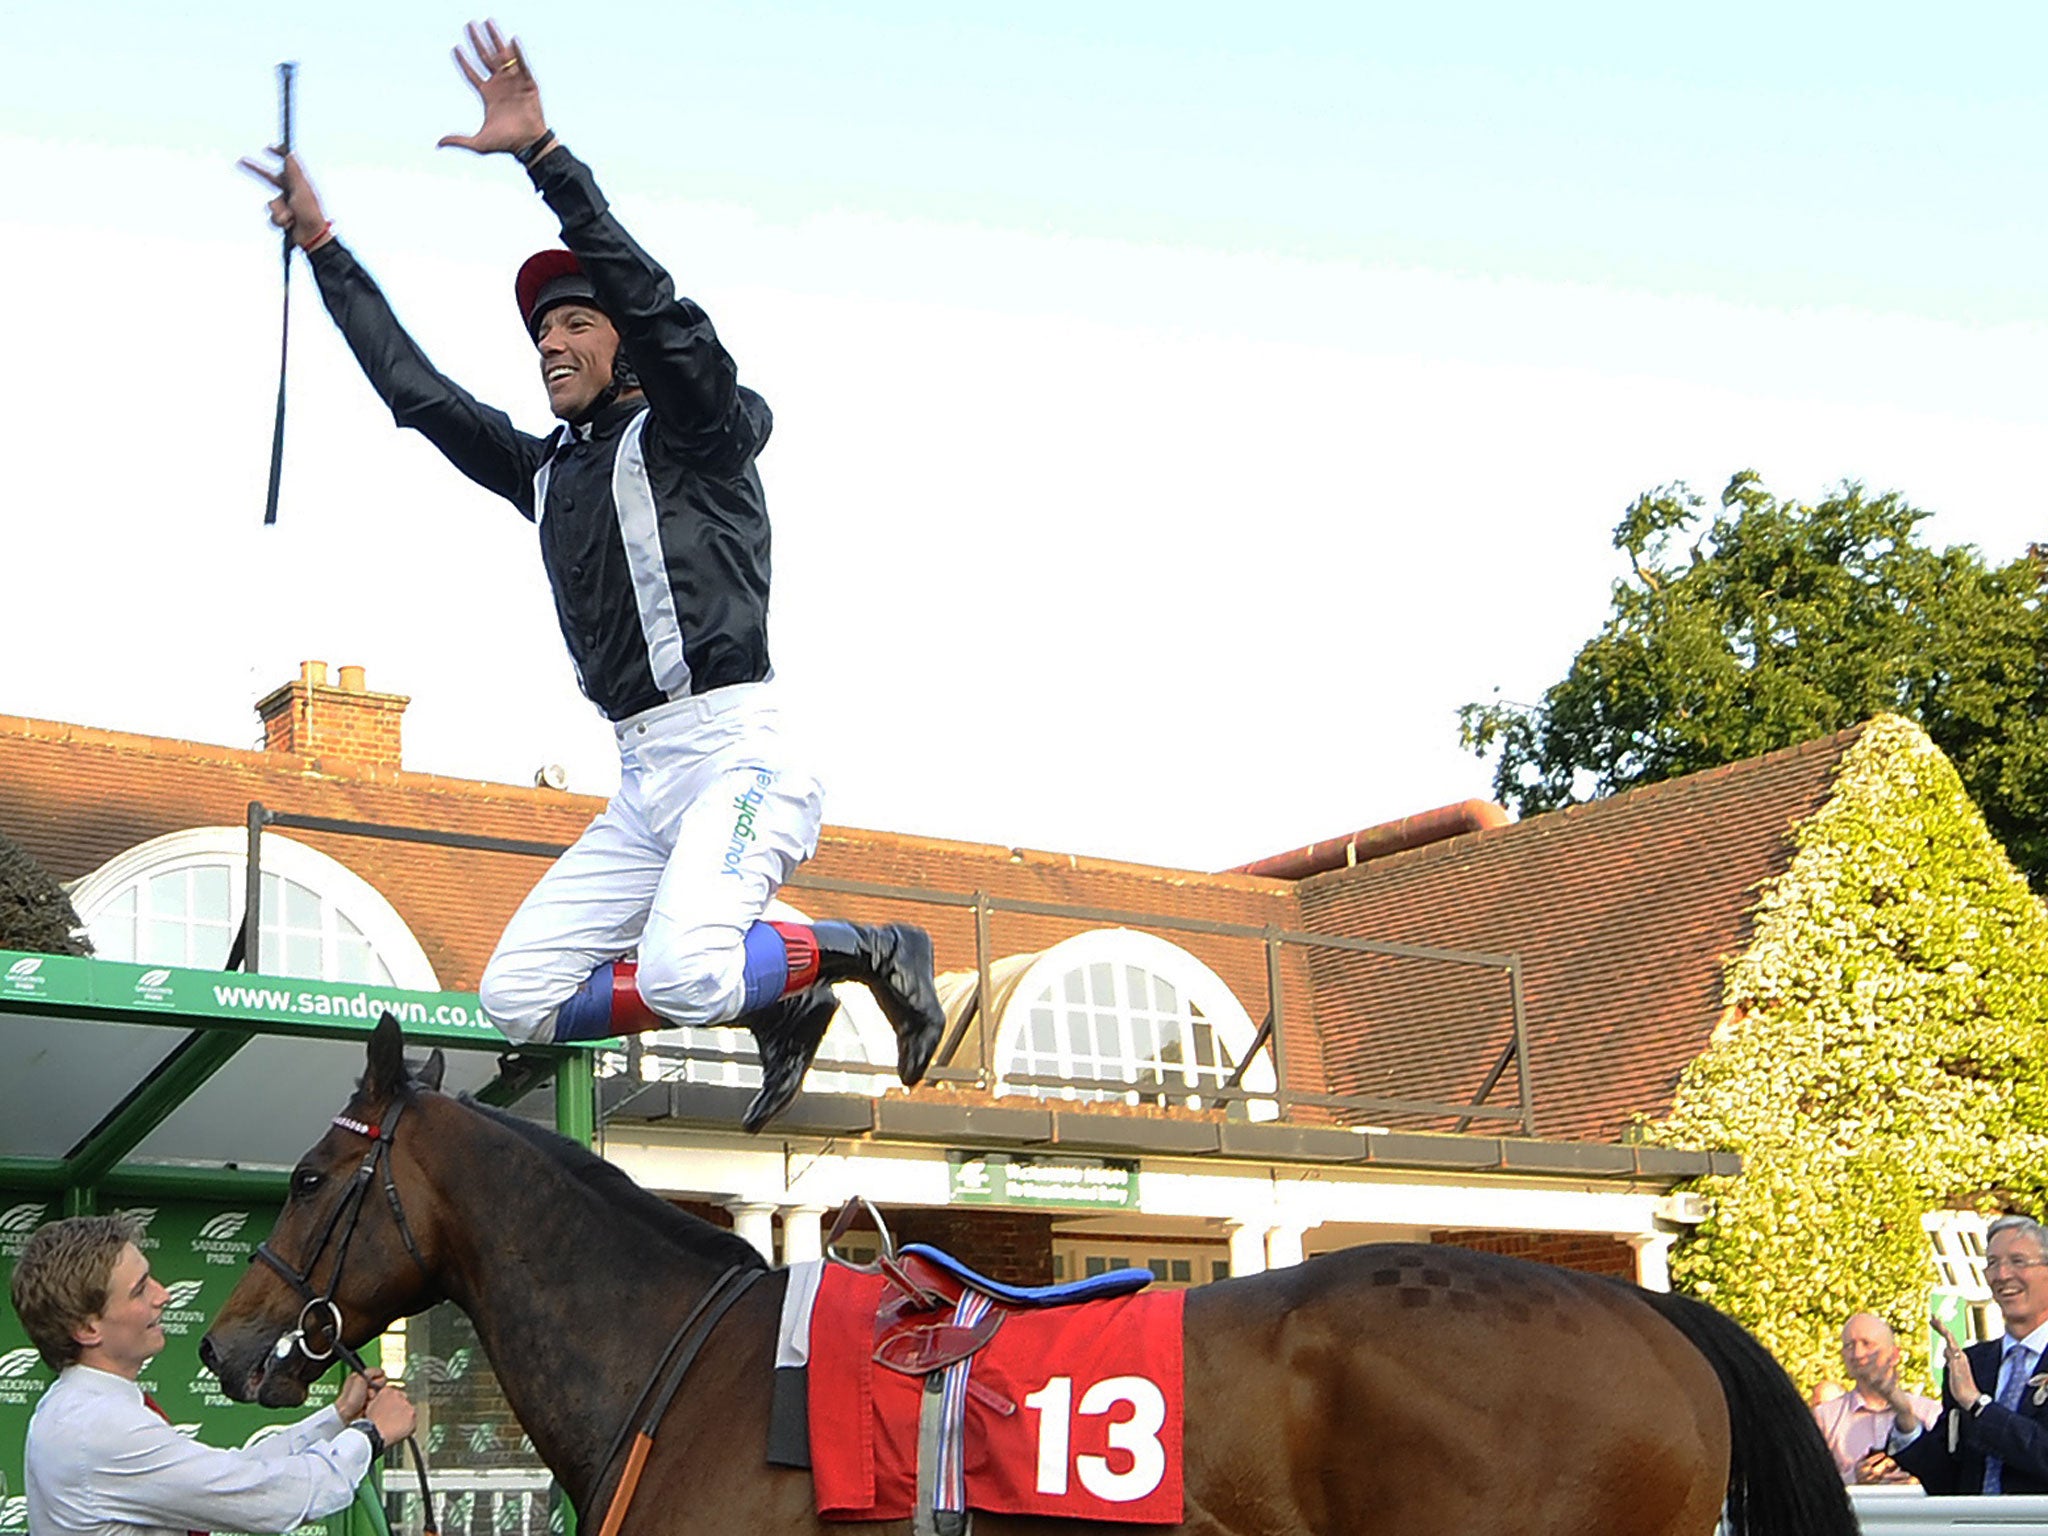 Frankie Dettori dismounts from Asian Trader in trademark style